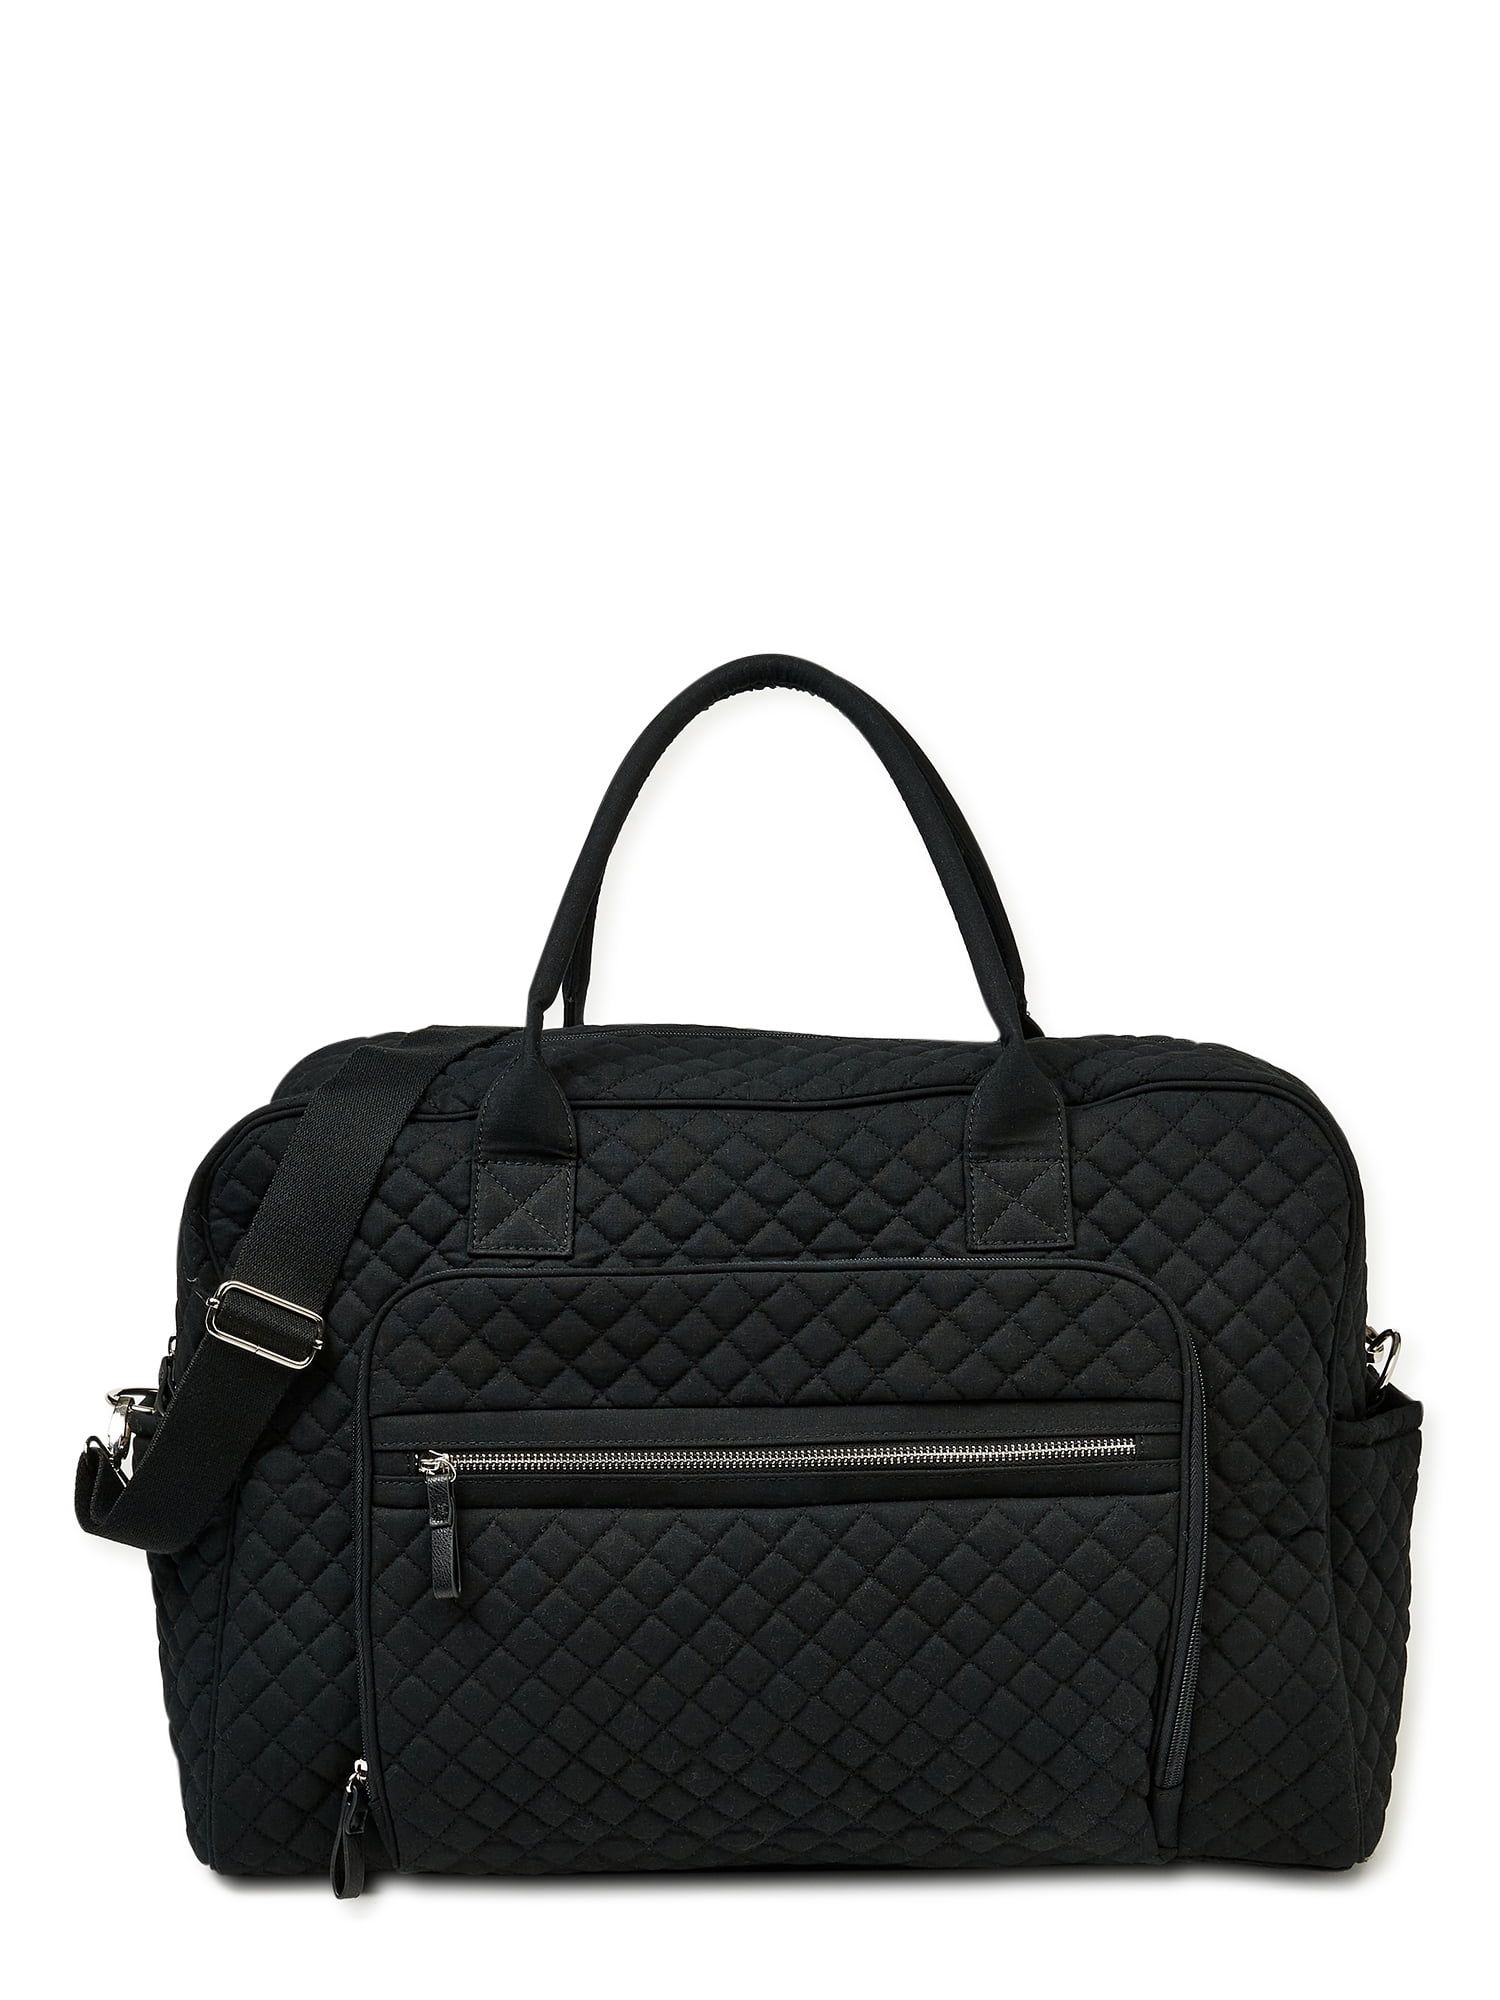 No Boundaries Women's Quilted Weekender Duffle Bag with Multi Compartments Black | Walmart (US)